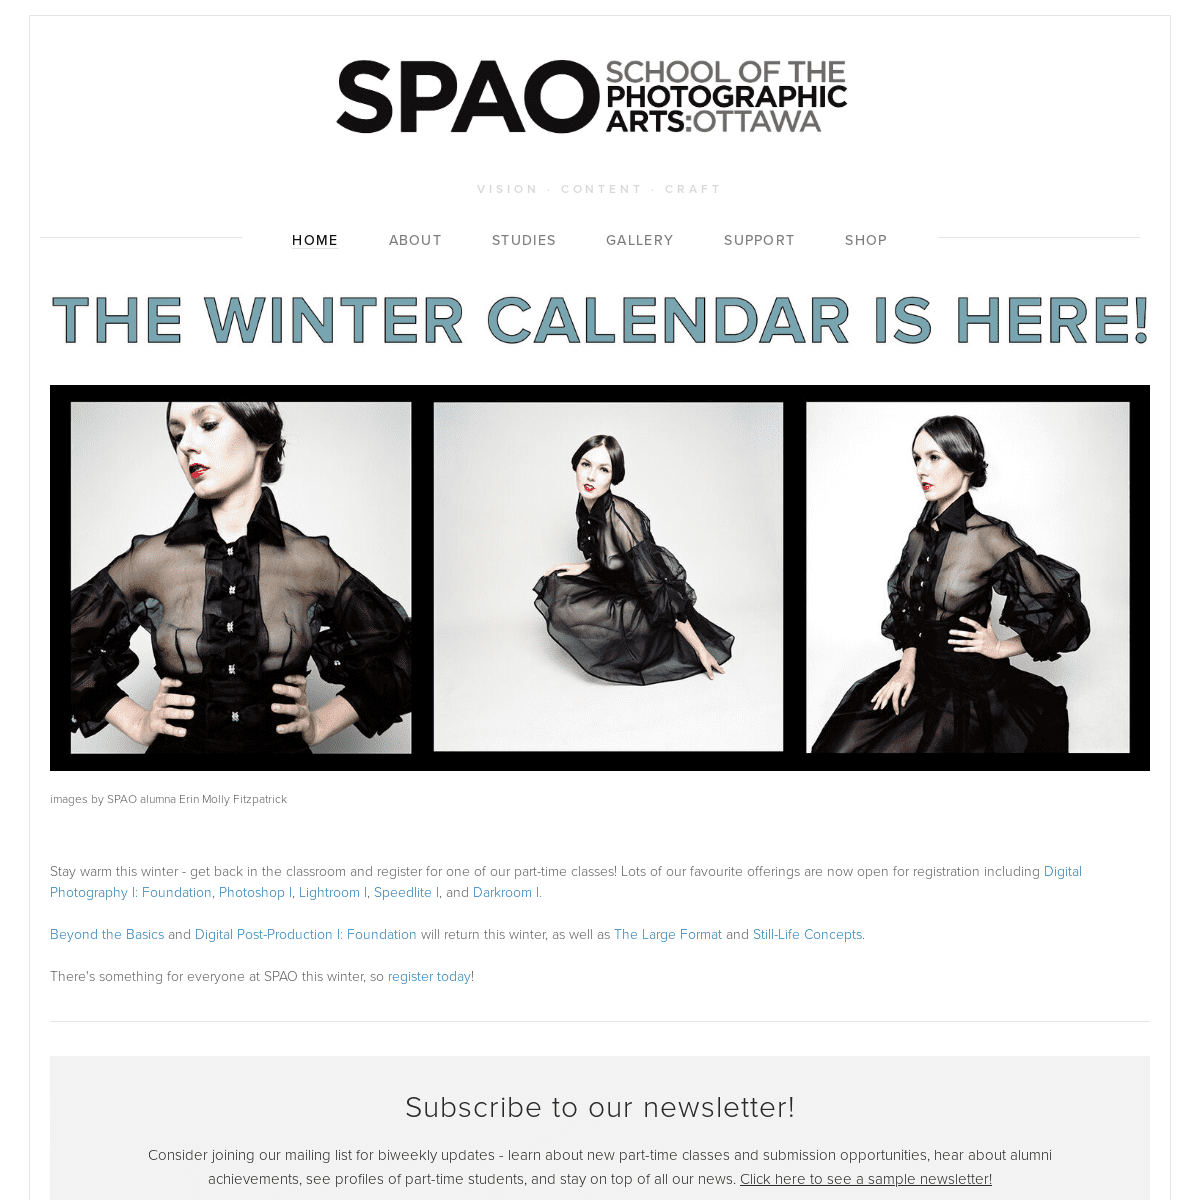 A complete backup of spao.ca